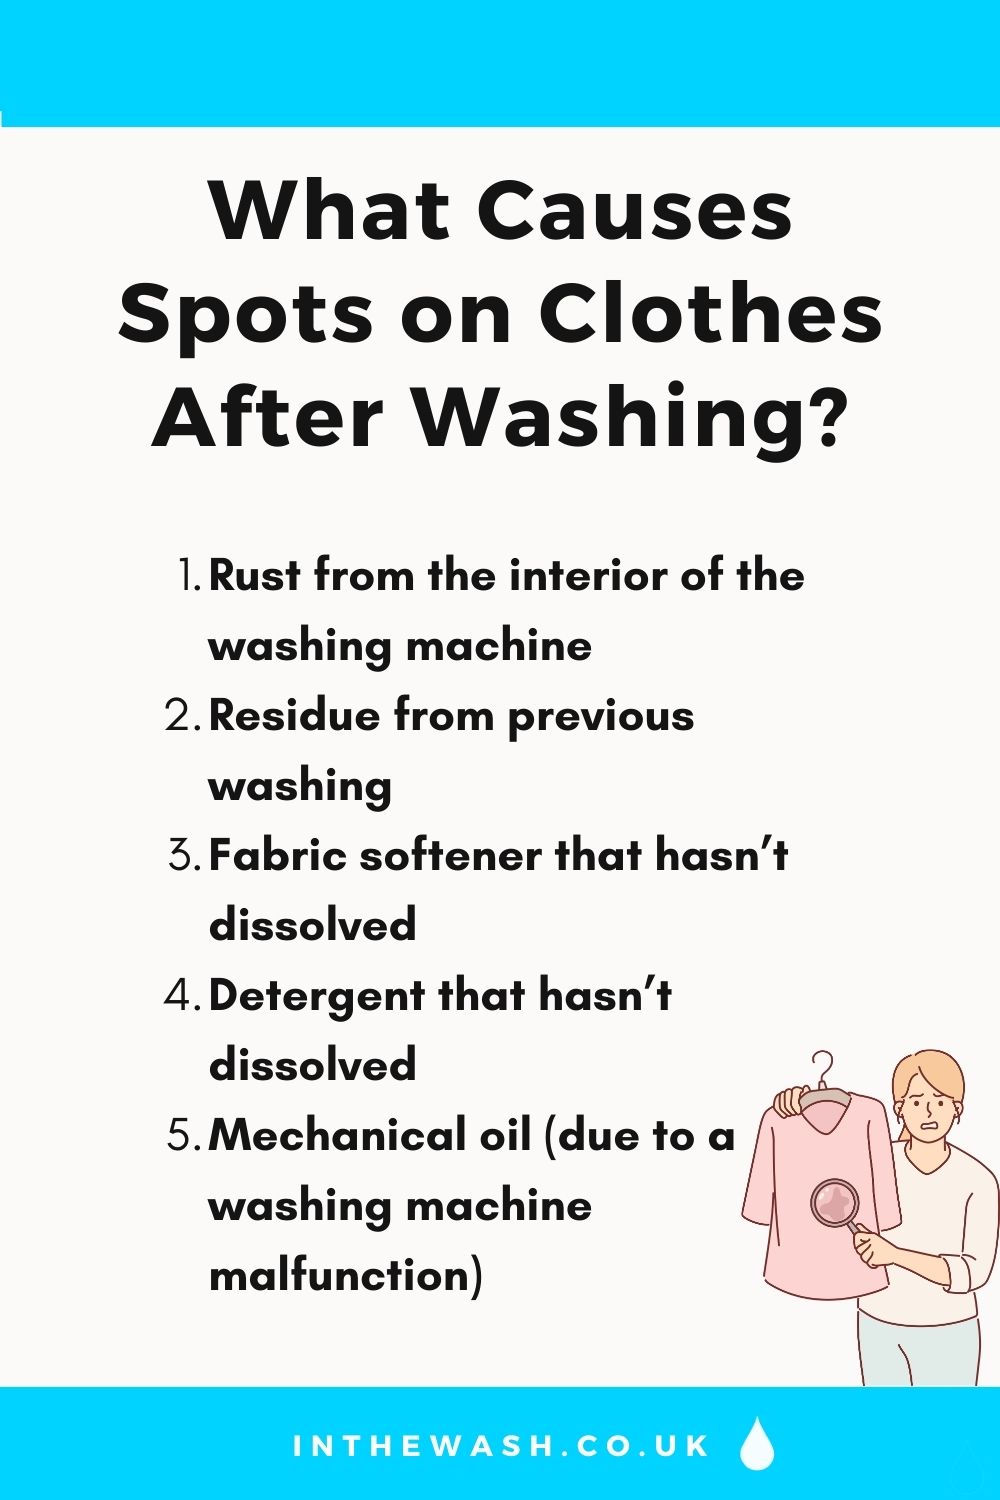 What Causes Spots on Clothes After Washing